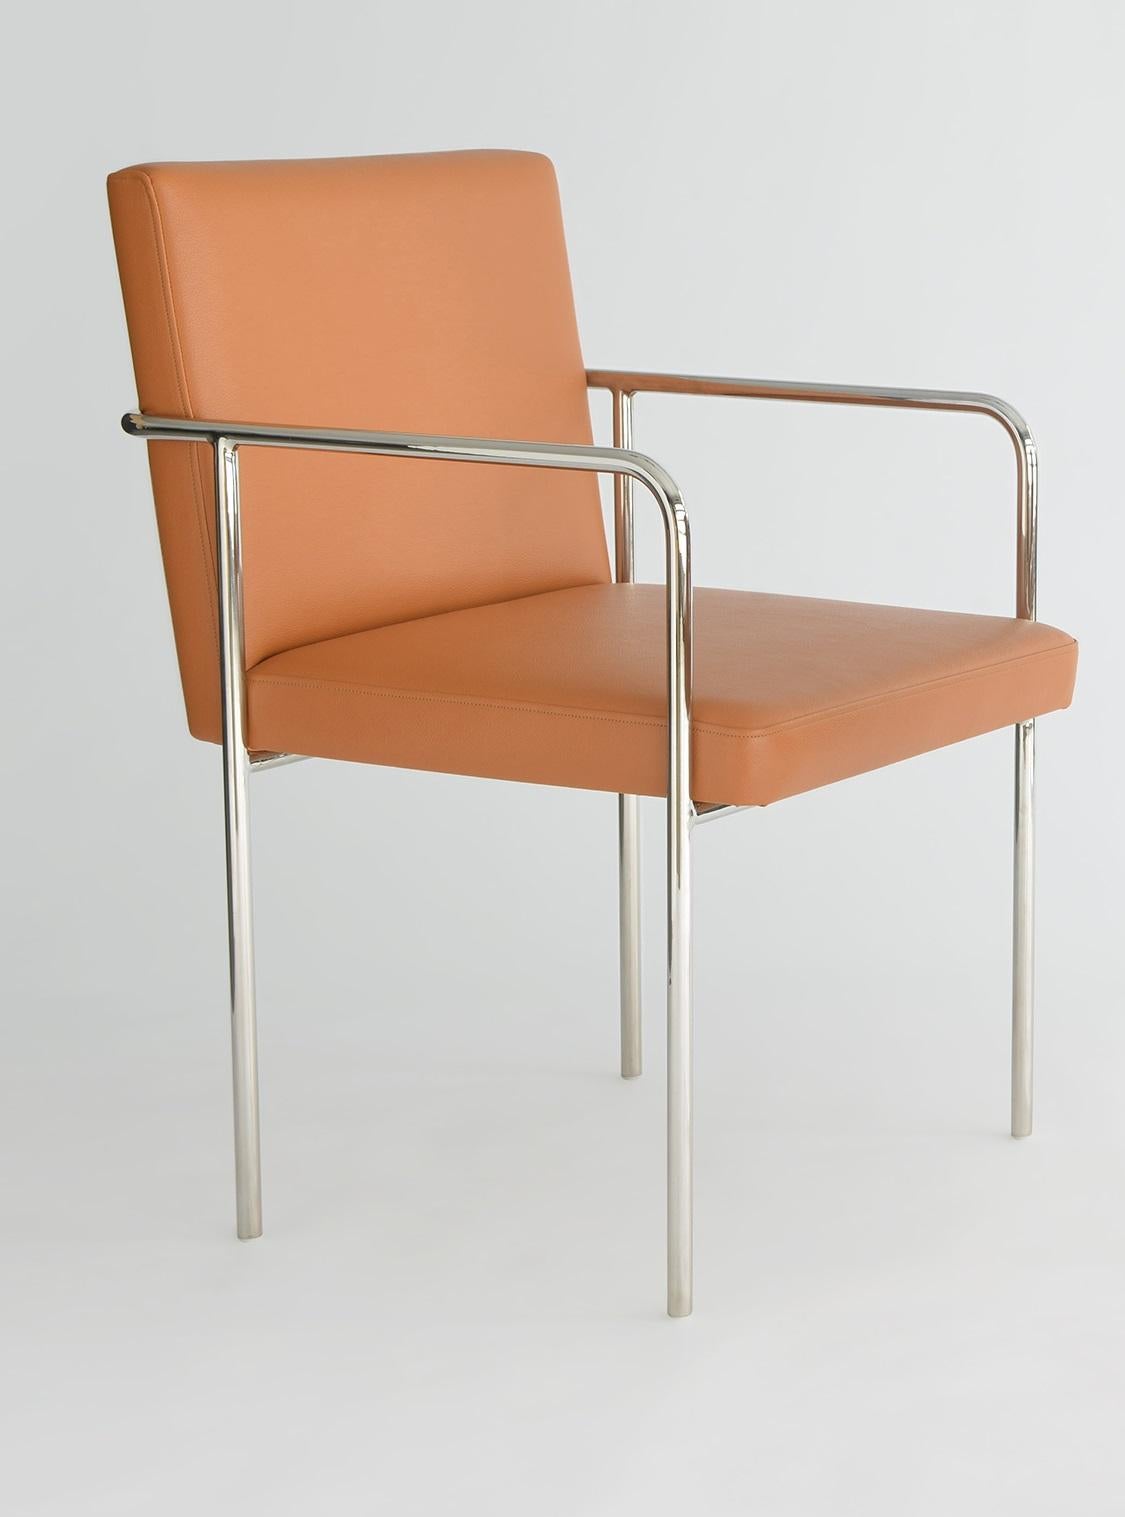 Trolley Side Chair With Arms by Phase Design
Dimensions: D 59.7 x W 55.2 x H 81.3 cm. 
Materials: Leather and polished chrome.

Solid steel bar available in a smoked brass, polished chrome, burnt copper, or powder coat finish with upholstered top.